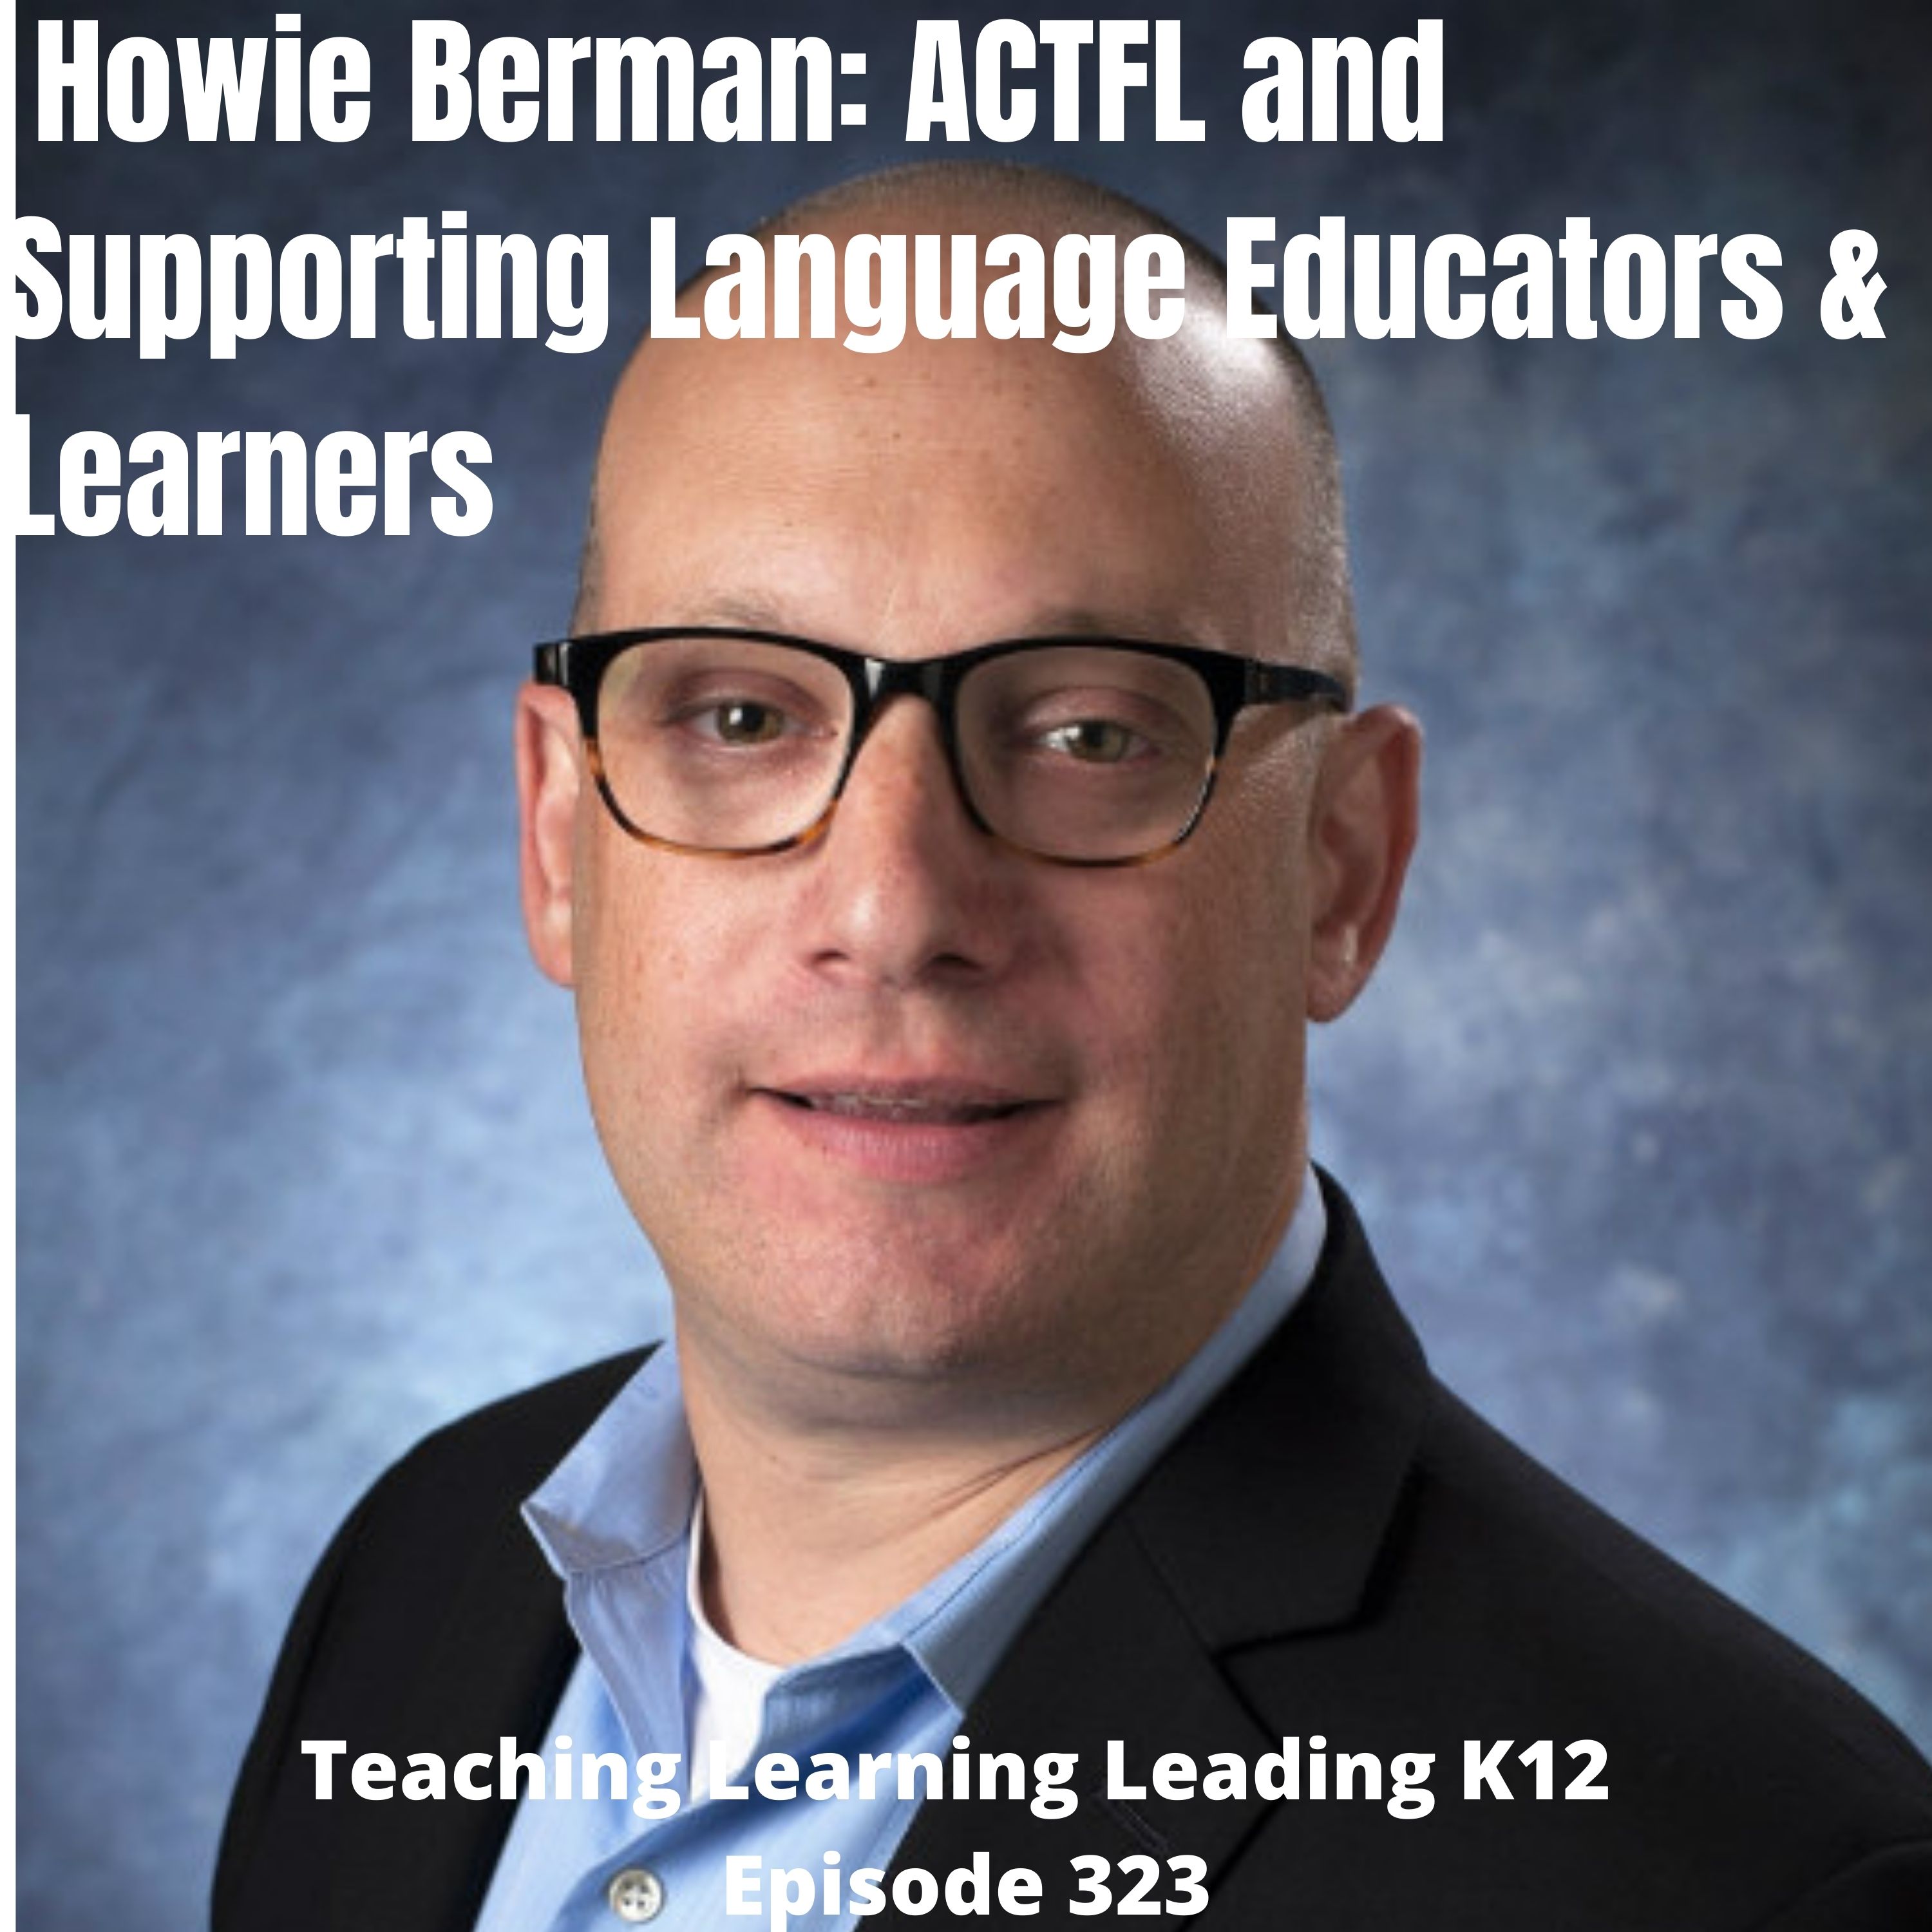 Howie Berman: ACTFL and Supporting Language Educators & Learners - 323 Image